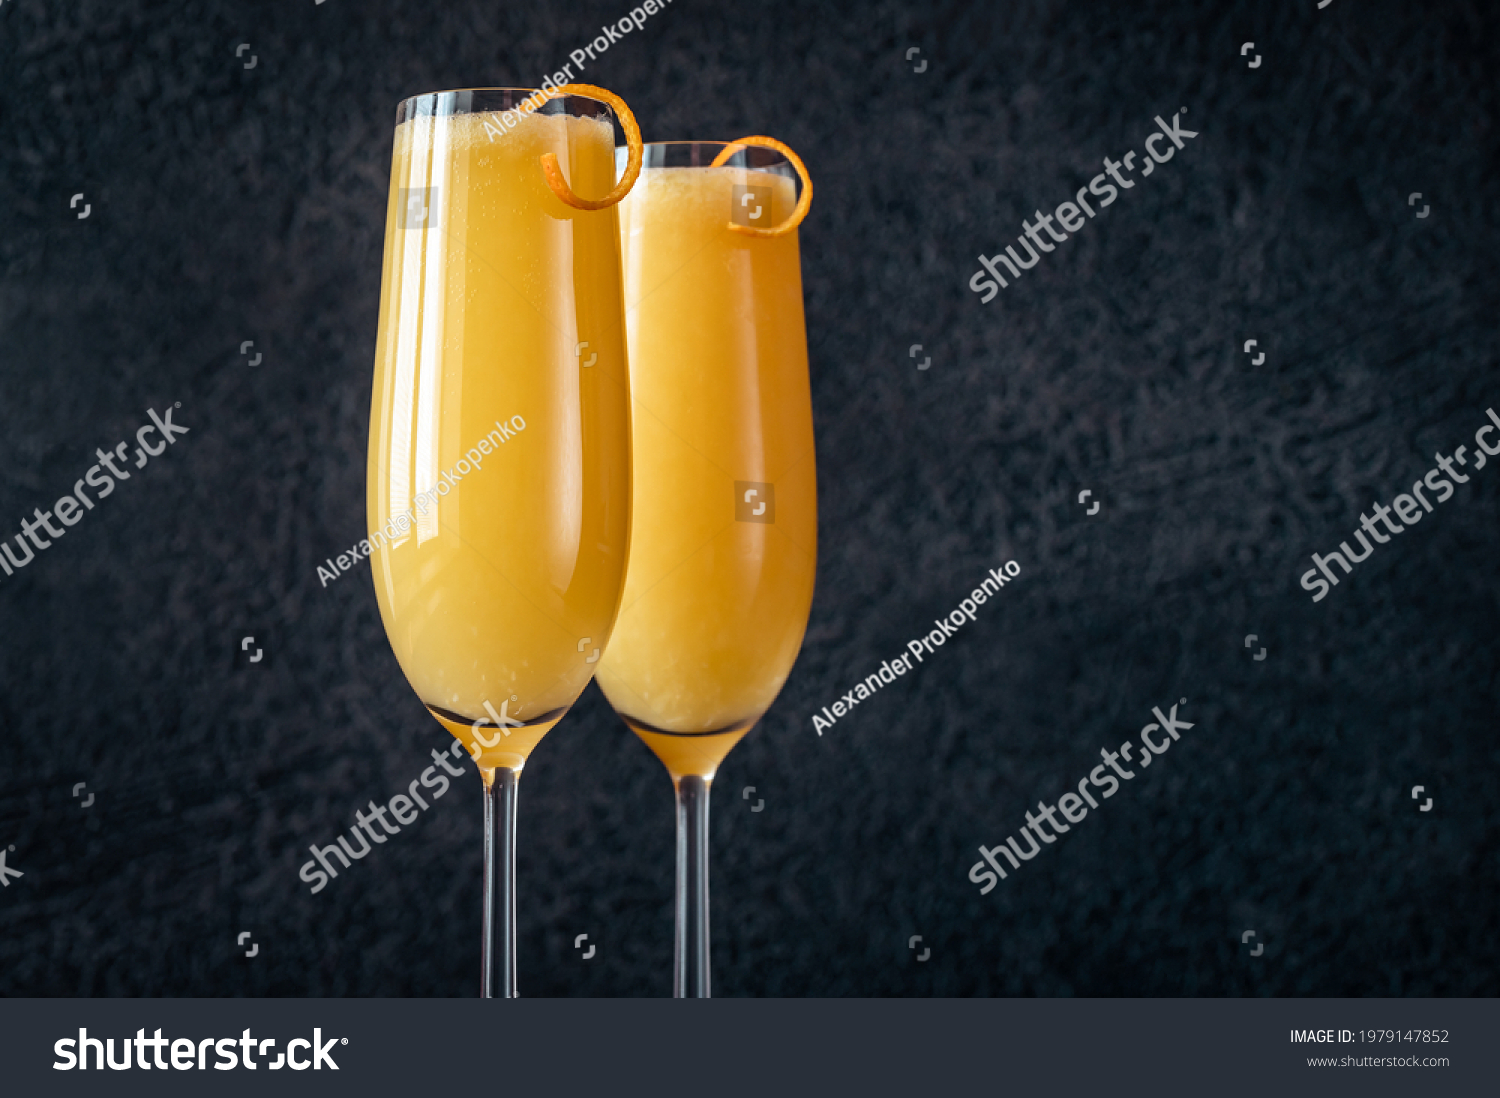 Two glasses of Buck's Fizz cocktail on black background #1979147852